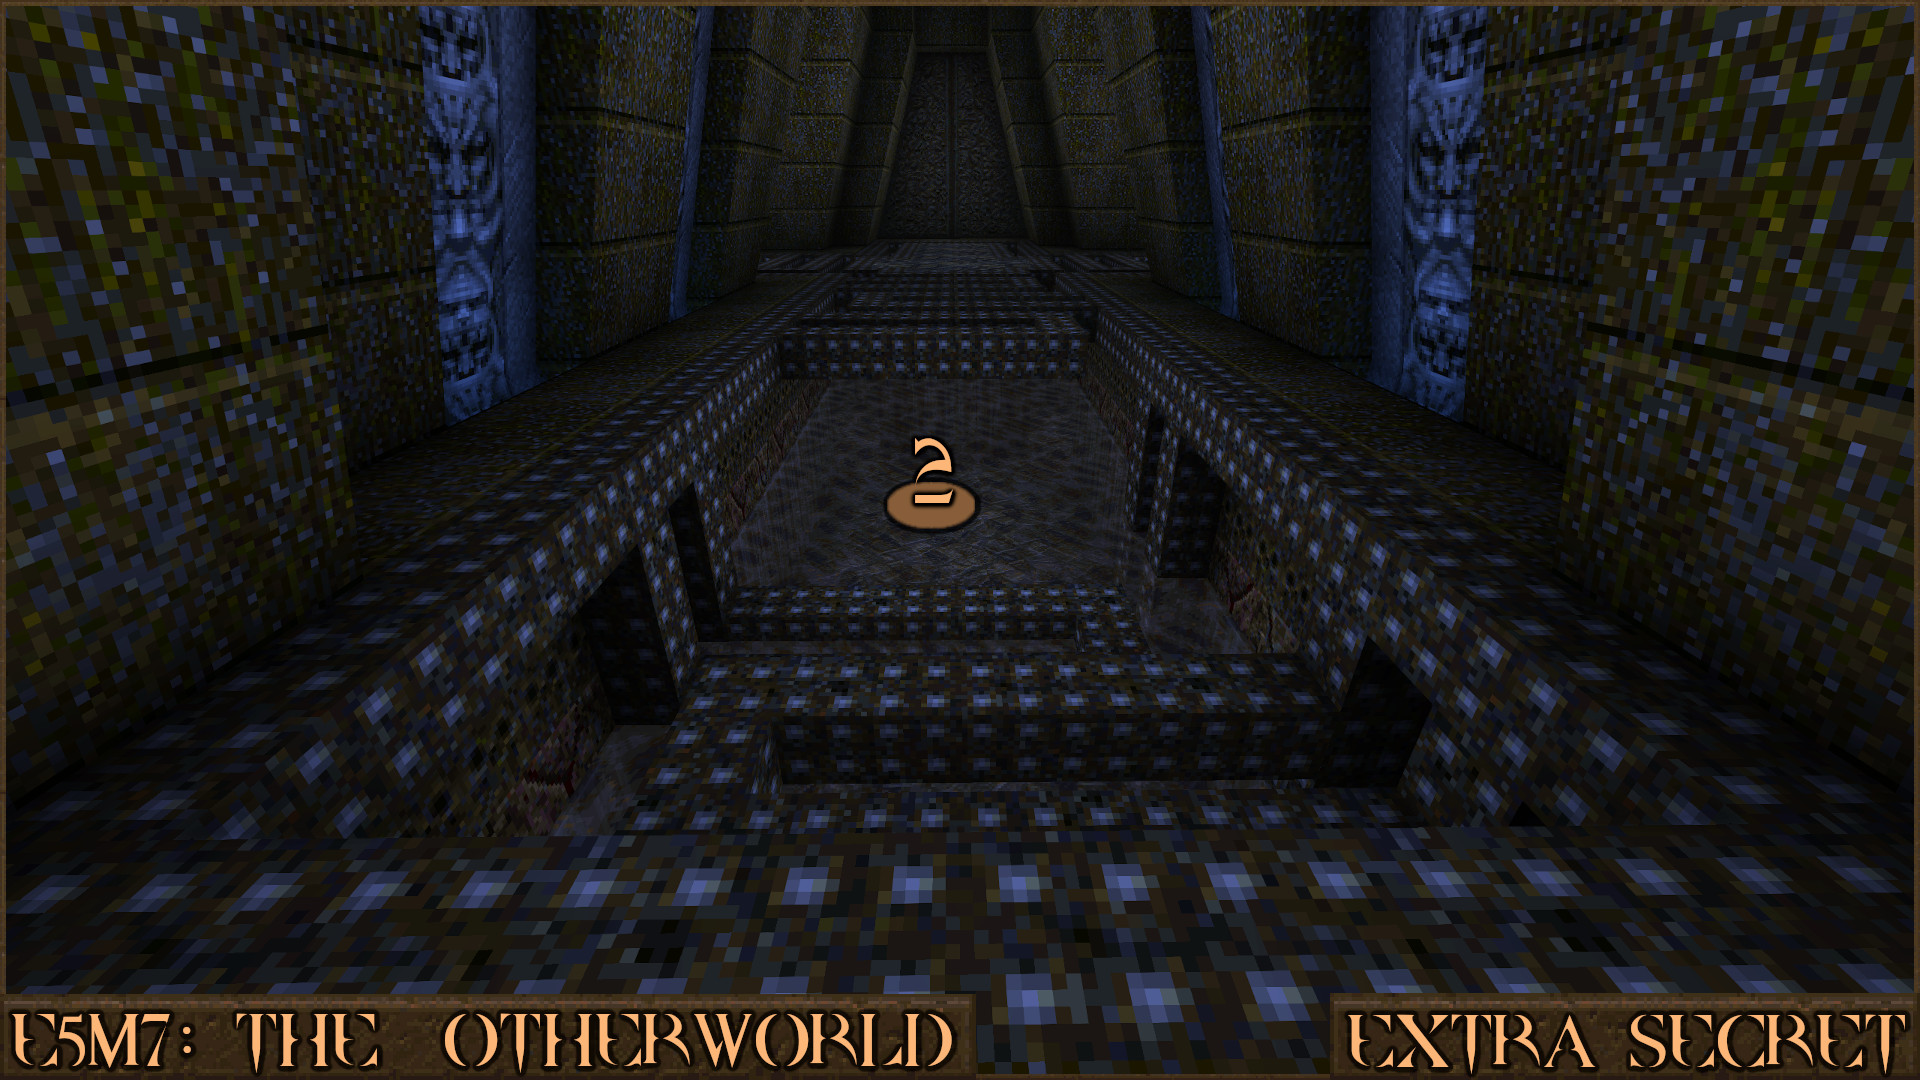 Quake Finding All Secrets in Quake Expansion pack: Dimension of the Past - E5M7: The Otherworld - 425821A